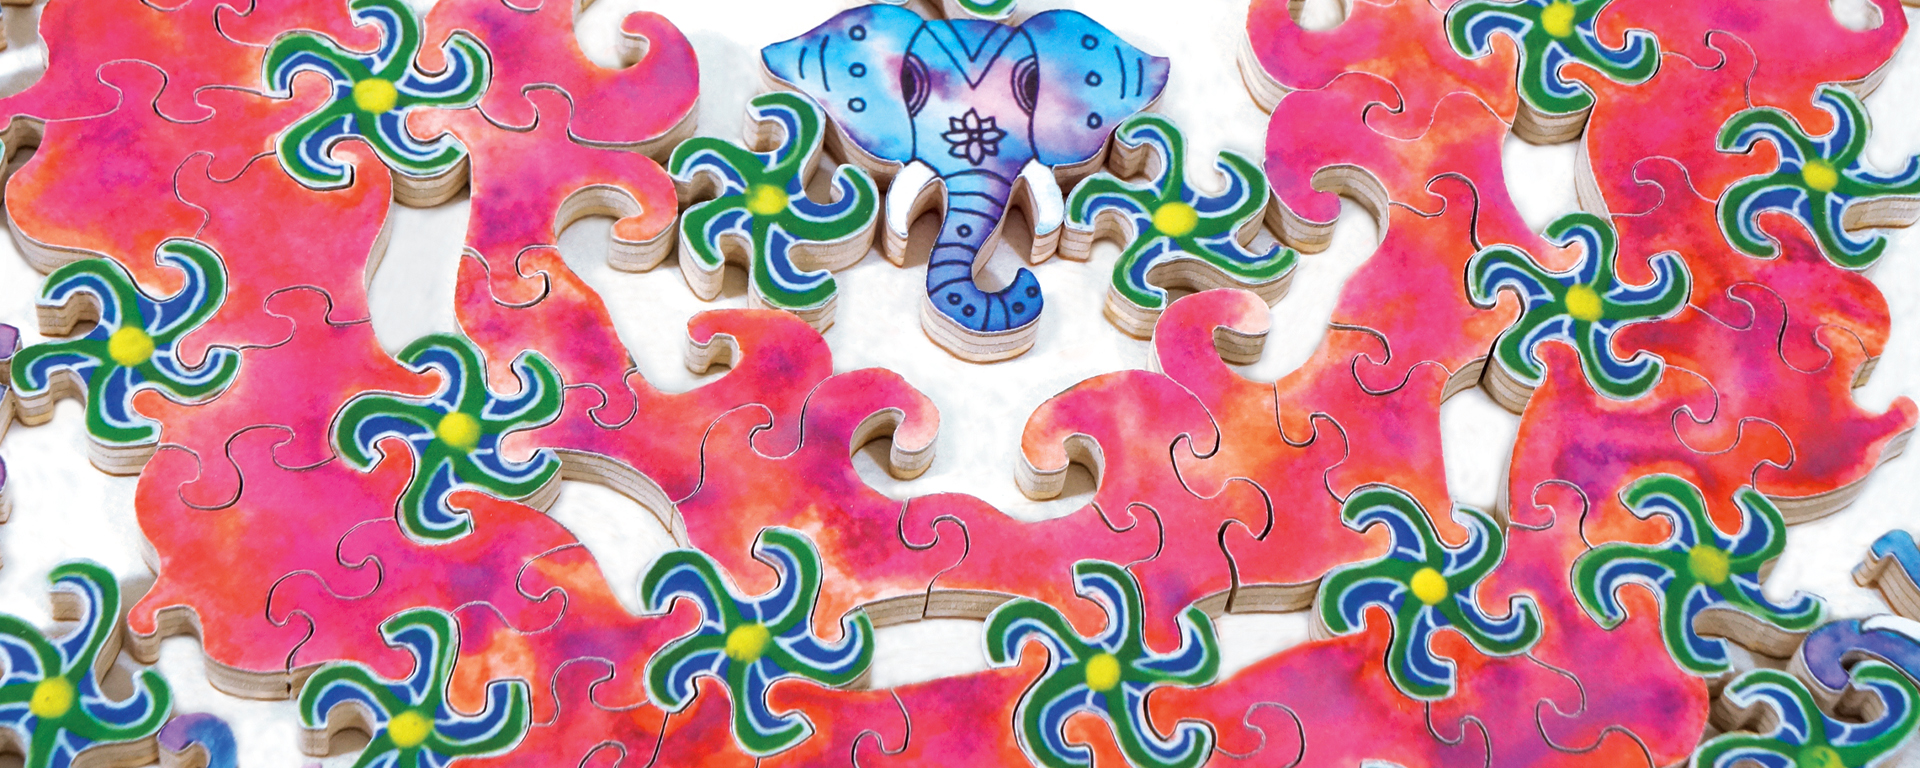 Wooden mandala puzzle featuring an elephant and green/blue swirls all surrounded by a hot pink background.